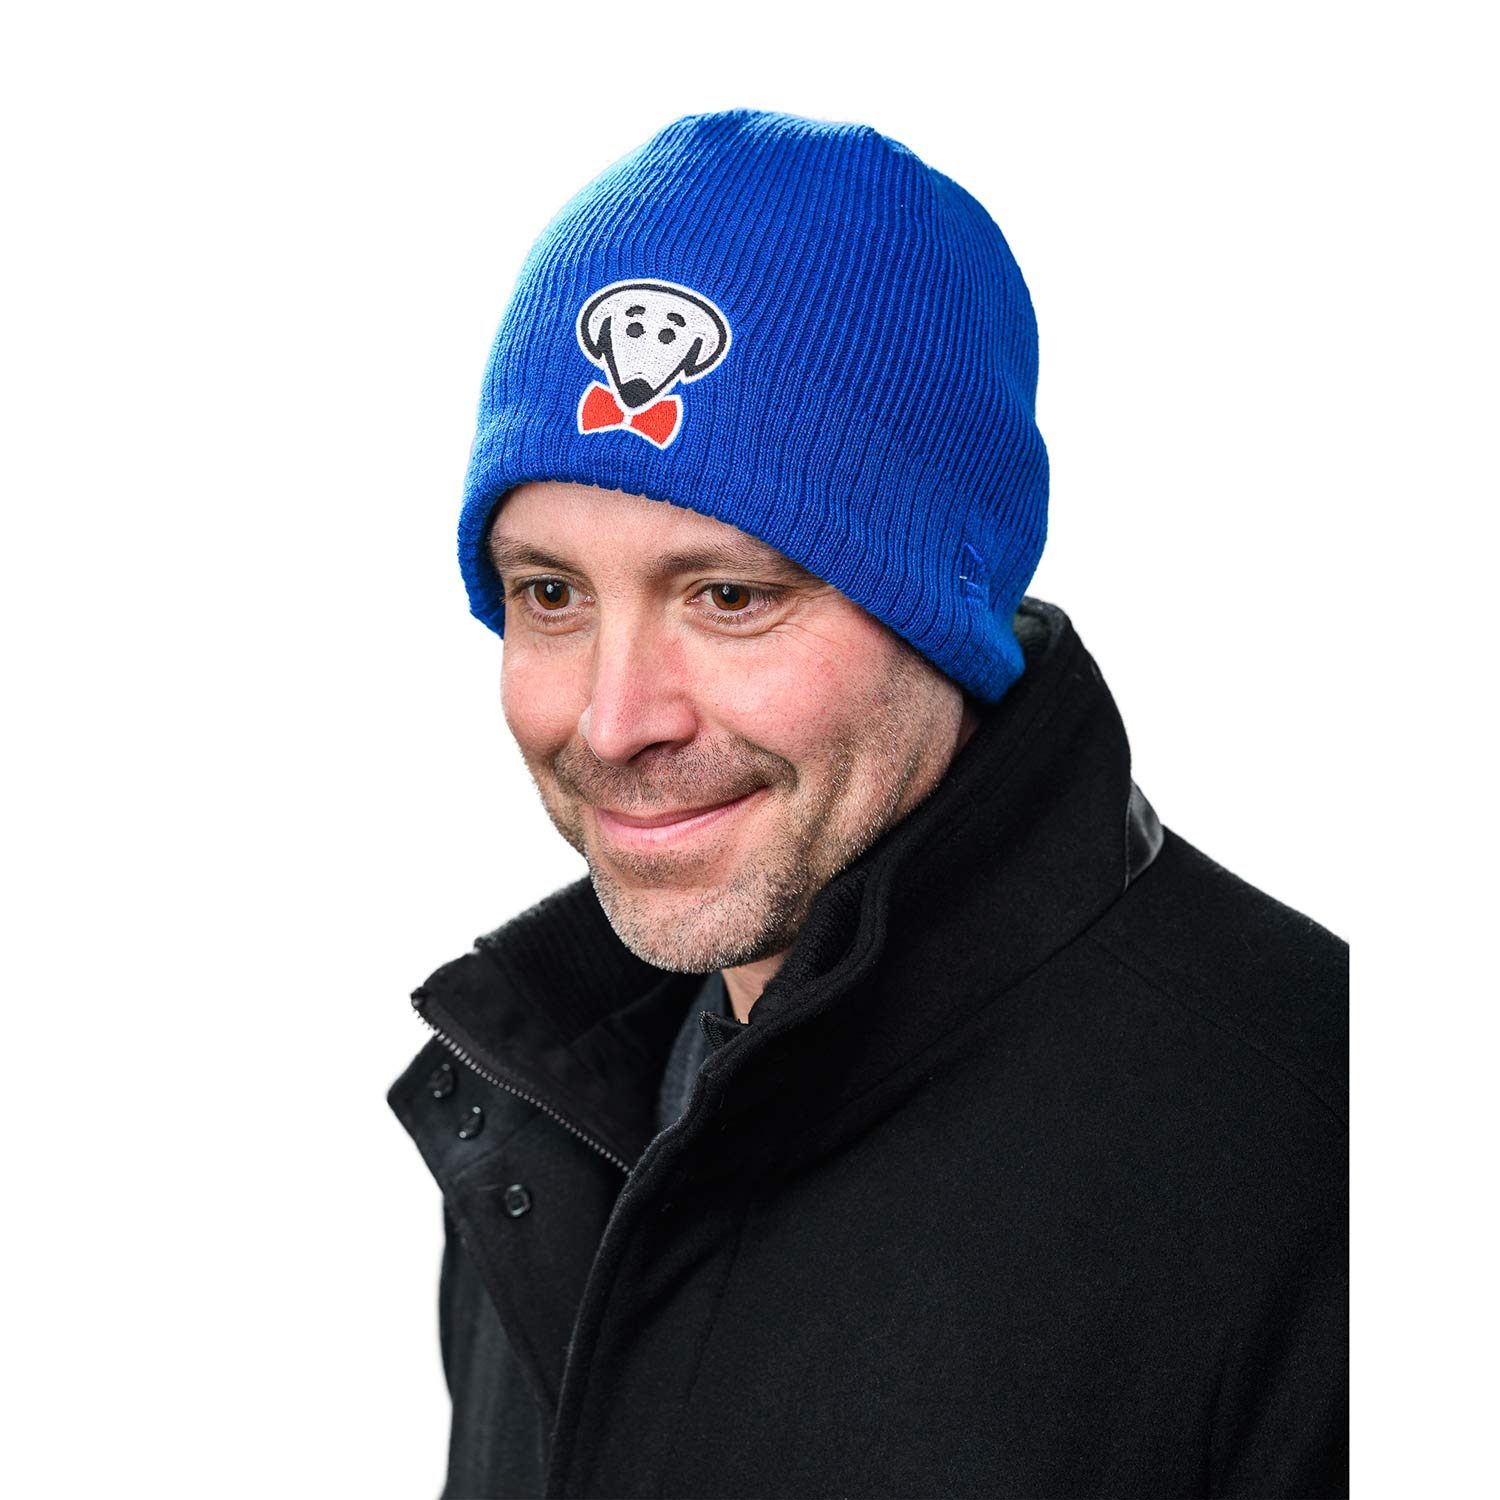 Kind of a polite smile. Like someone said something not that funny but he didn't want to be rude. - Taylor winter knit hat in royal blue by Beau Tyler